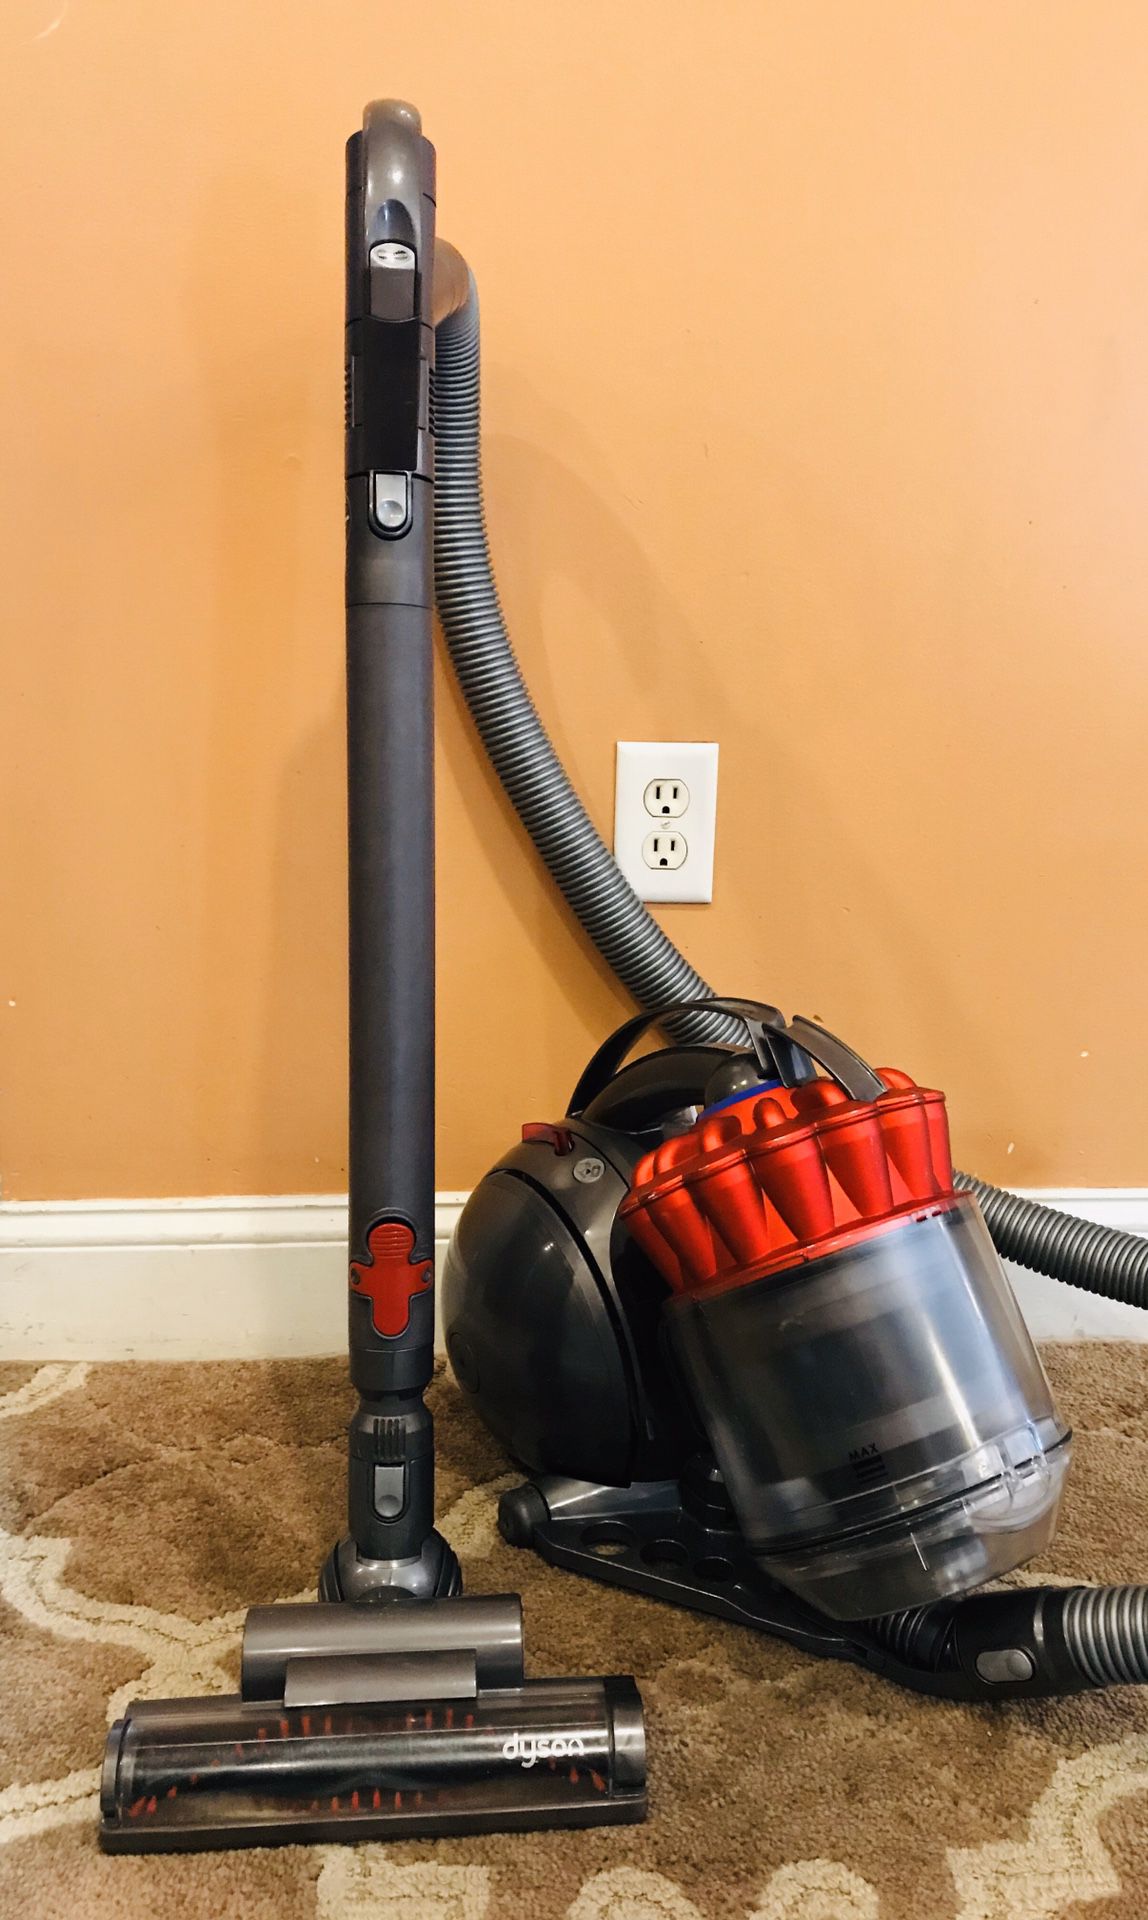 Dyson Dc39 Bagless canister vacuum cleaner